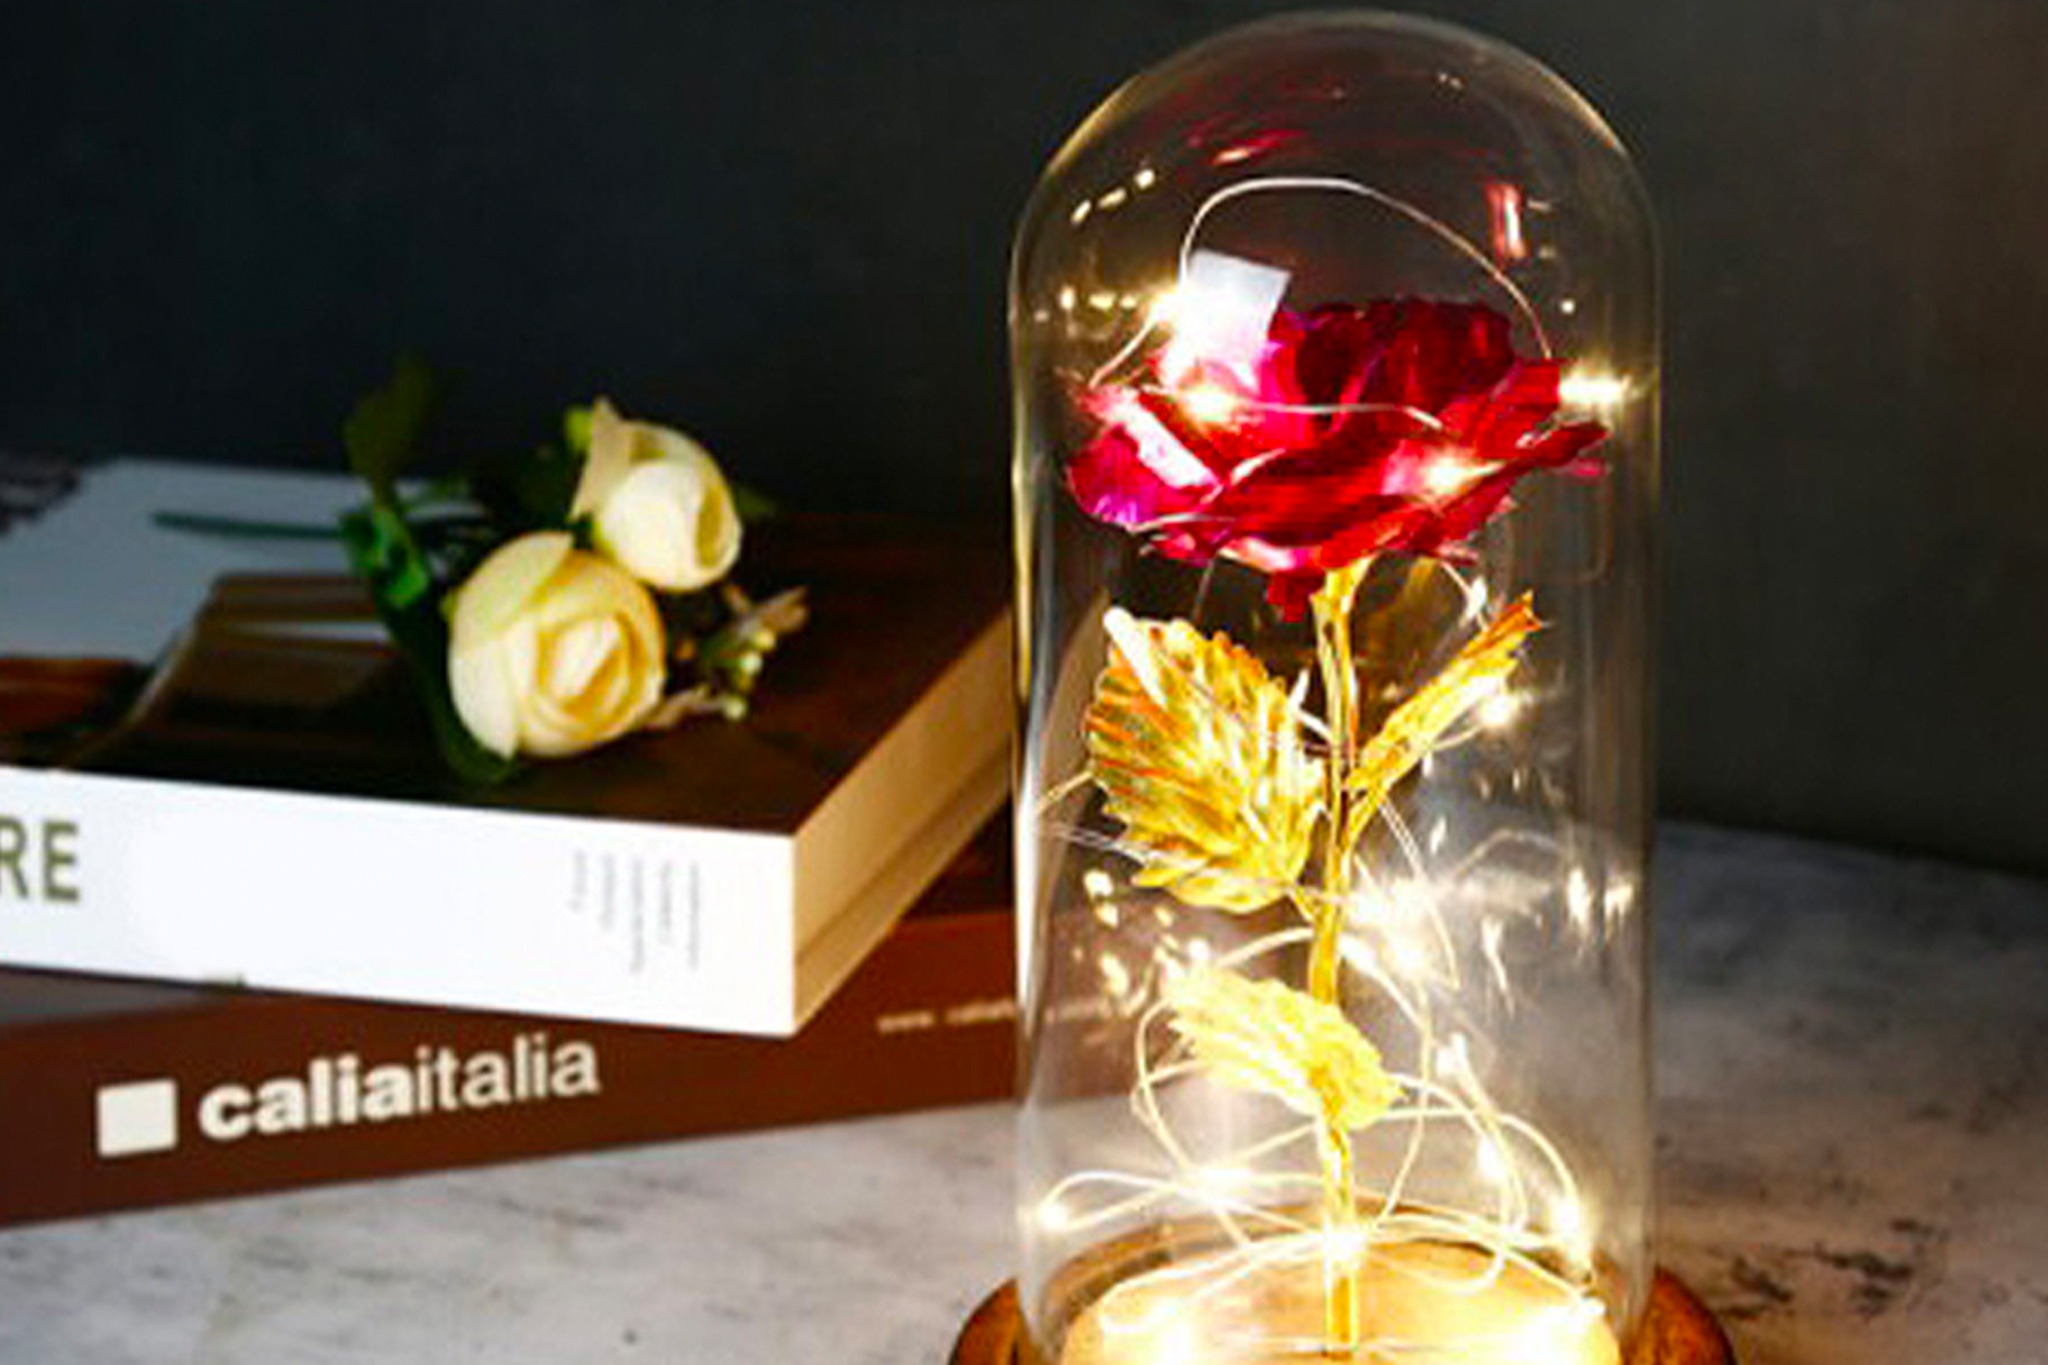 This beautiful everlasting rose is the perfect gift for anyone in your life